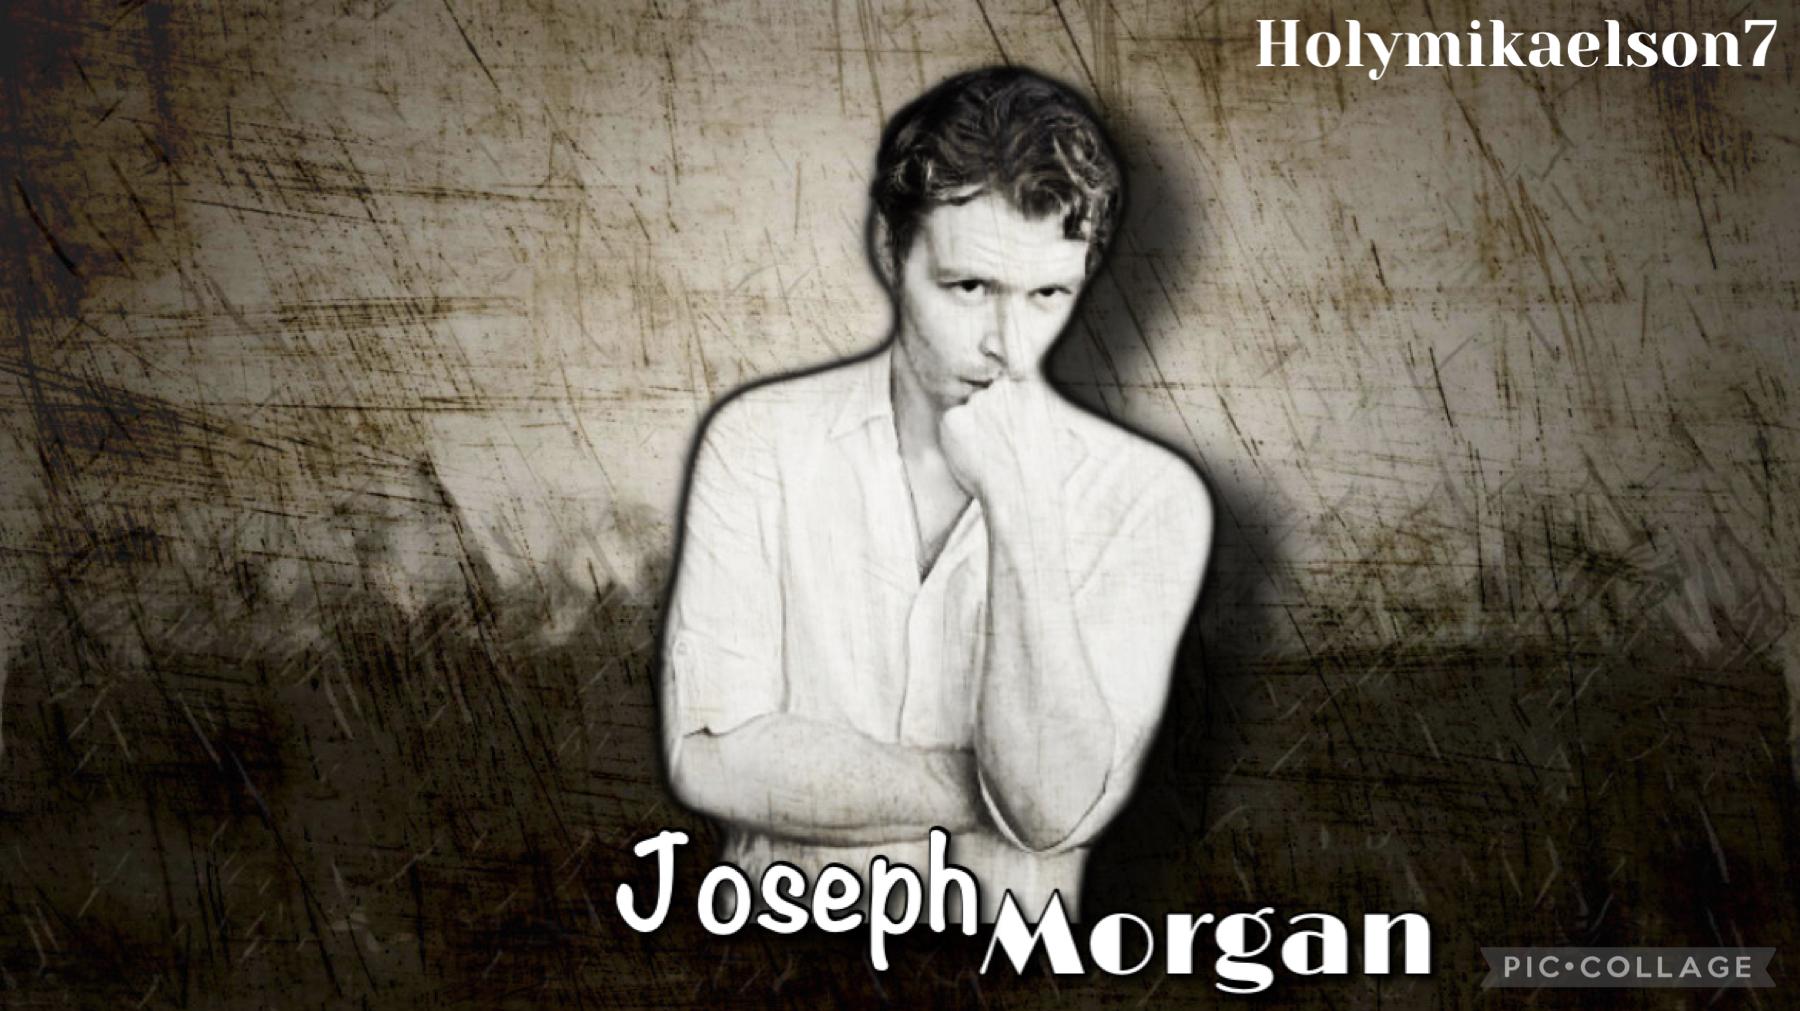 Joseph Morgan😍💕!!! 5/17/21 (should I come back? This would be my new account?)